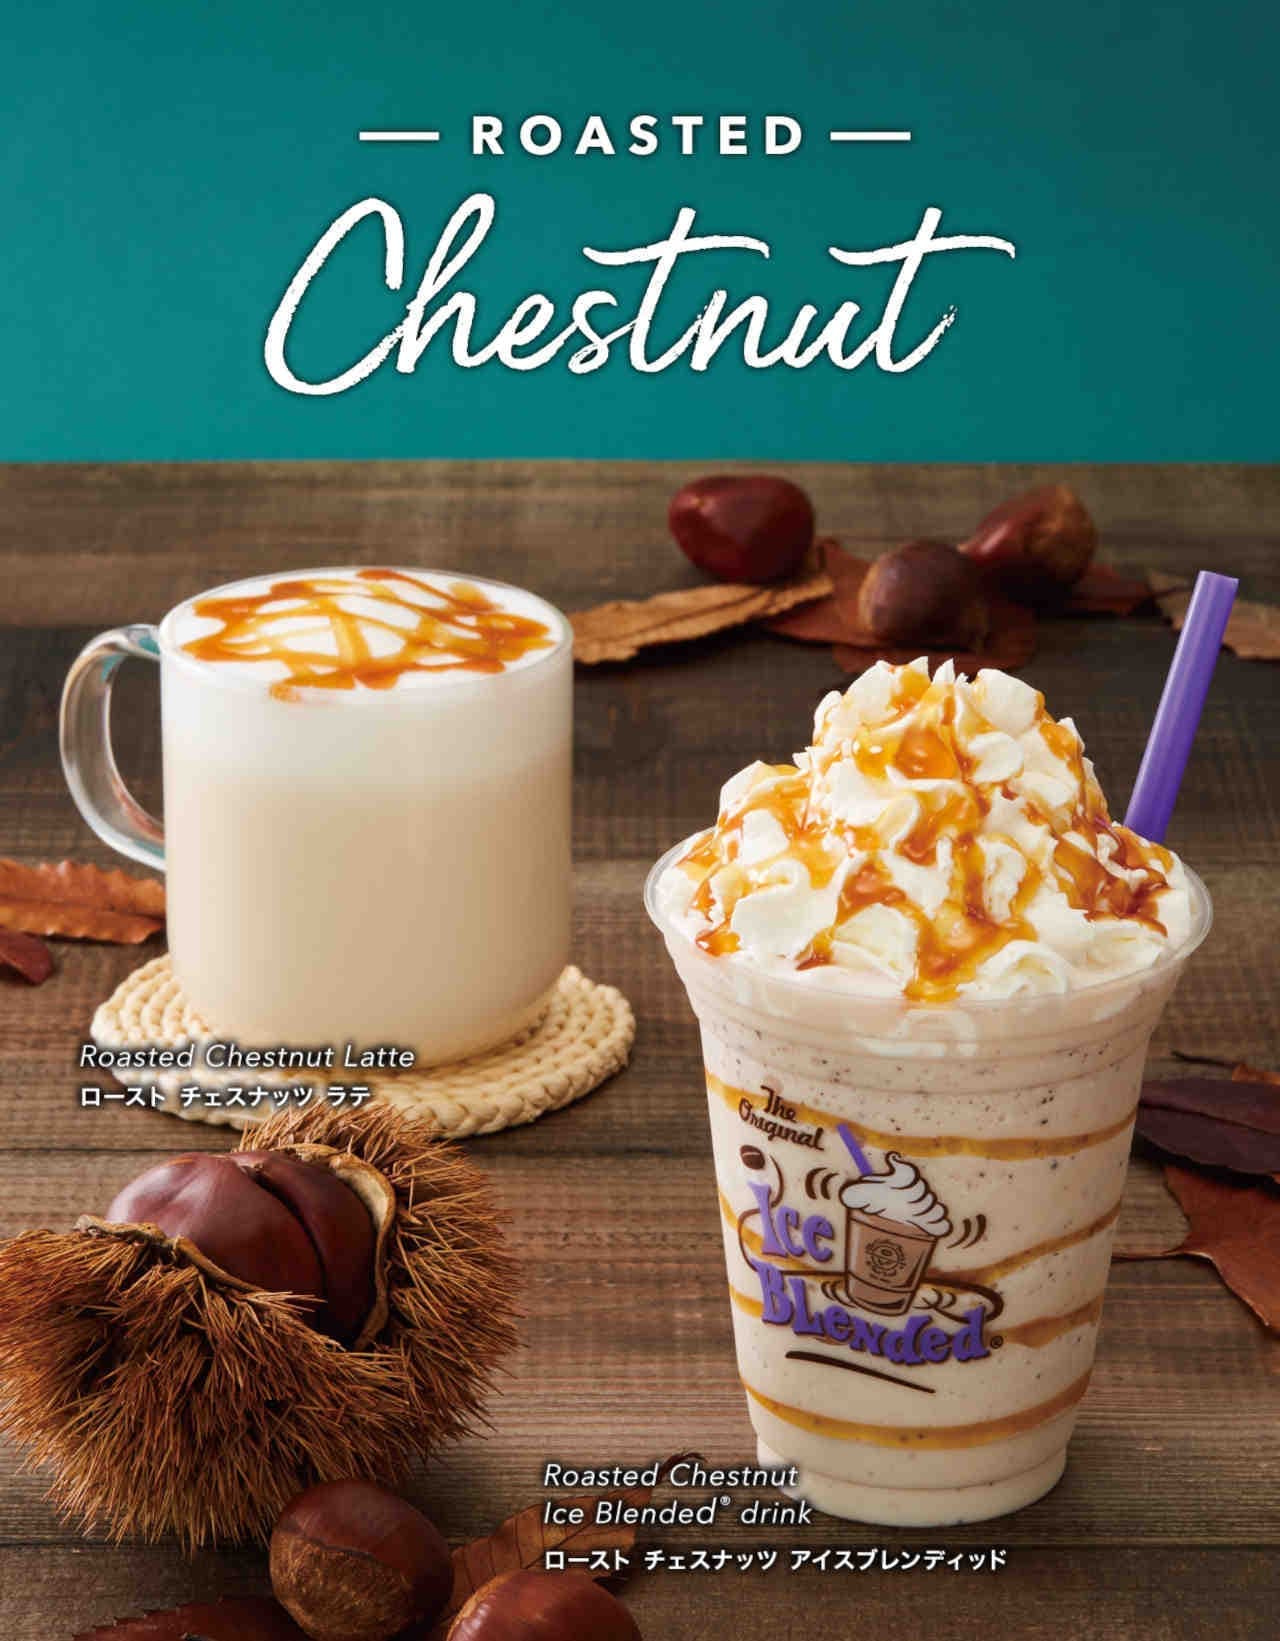 "Roasted Chestnut Ice Blended" and "Roasted Chestnut Latte" for Coffee Bean & Tea Leaf